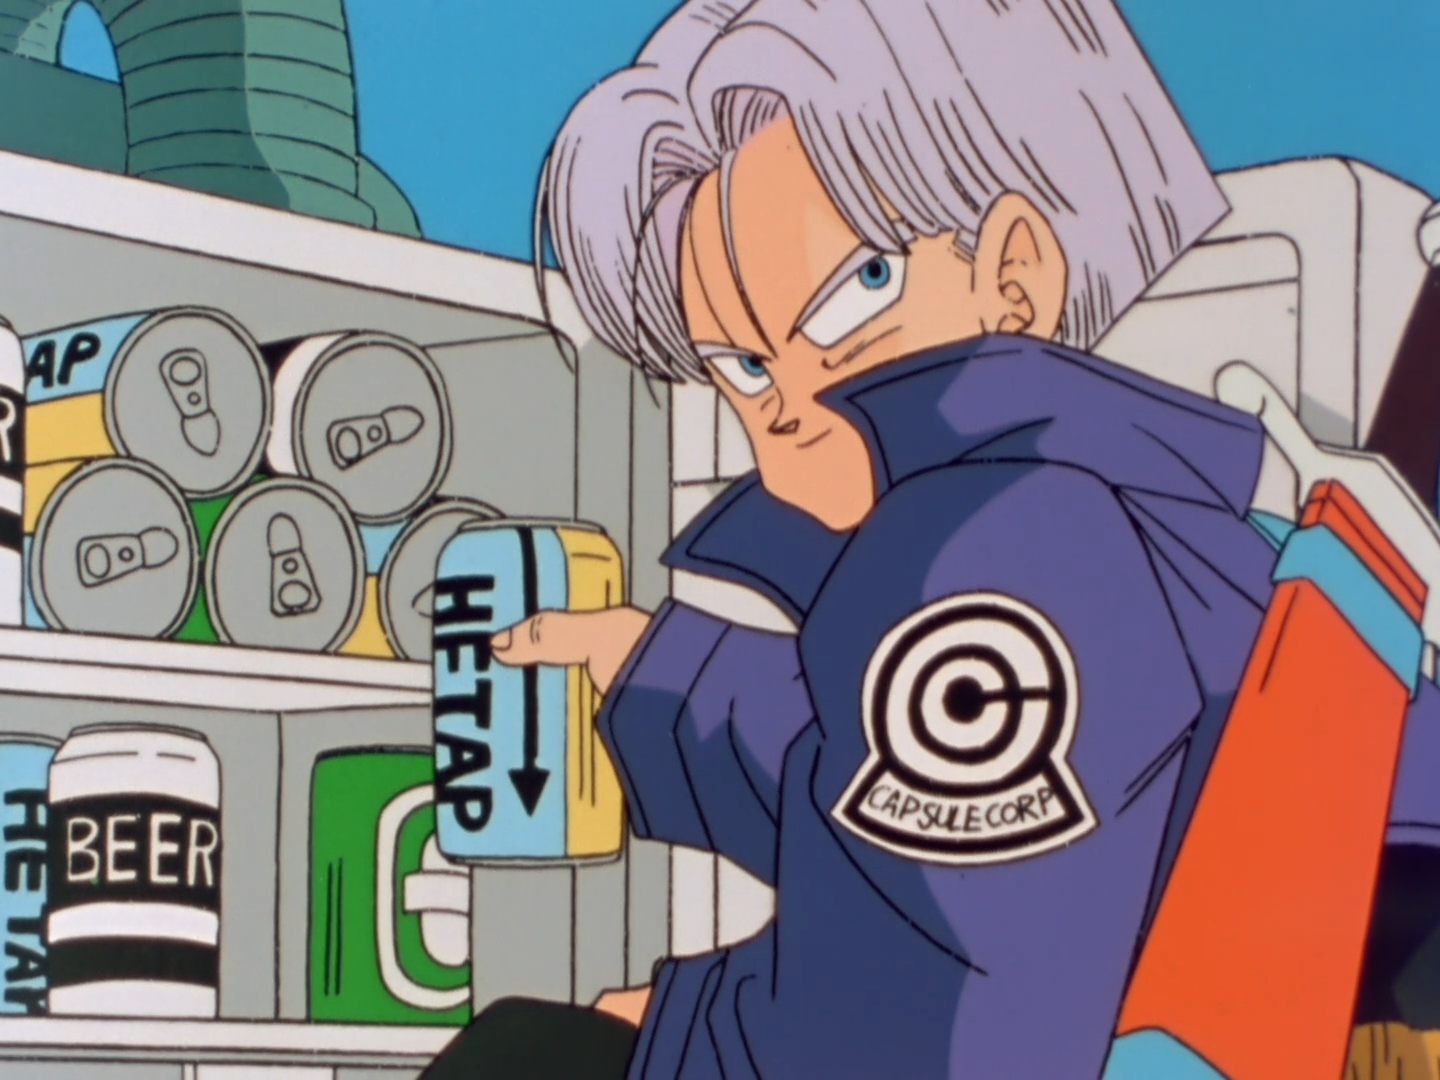 The Dragon Blog: Dragon Ball Kai Ep 57 - Welcome Back, Son Goku!  Confessions Of The Mysterious Youth, Trunks